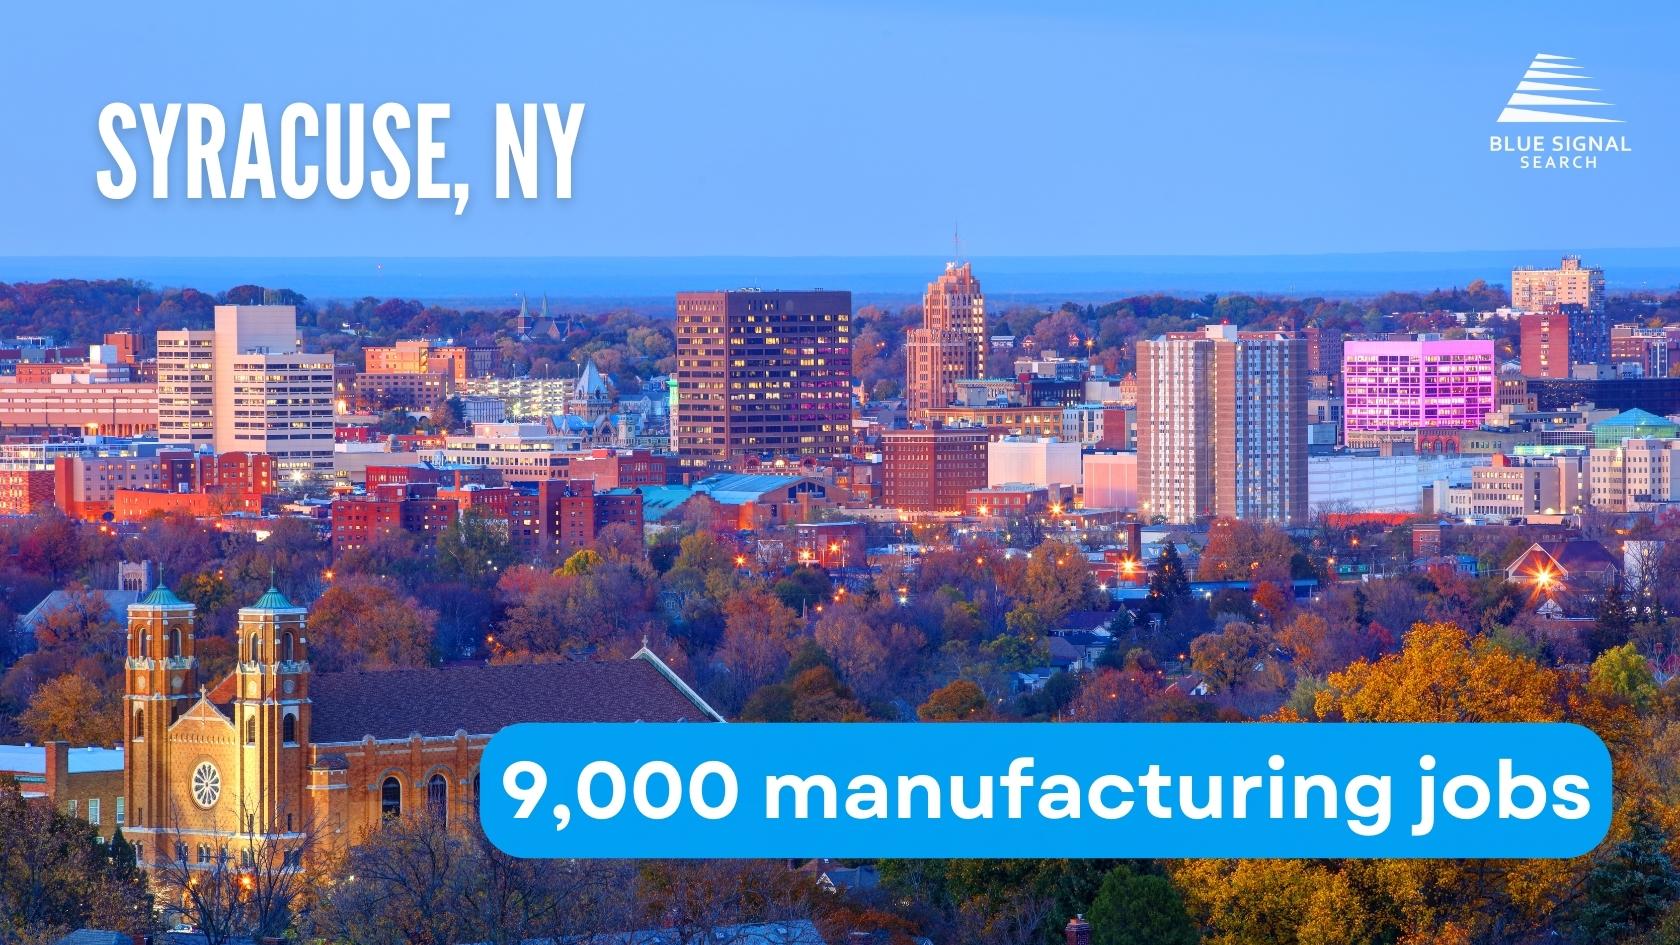 Skyline of Syracuse, NY with key manufacturing statistics highlighted.